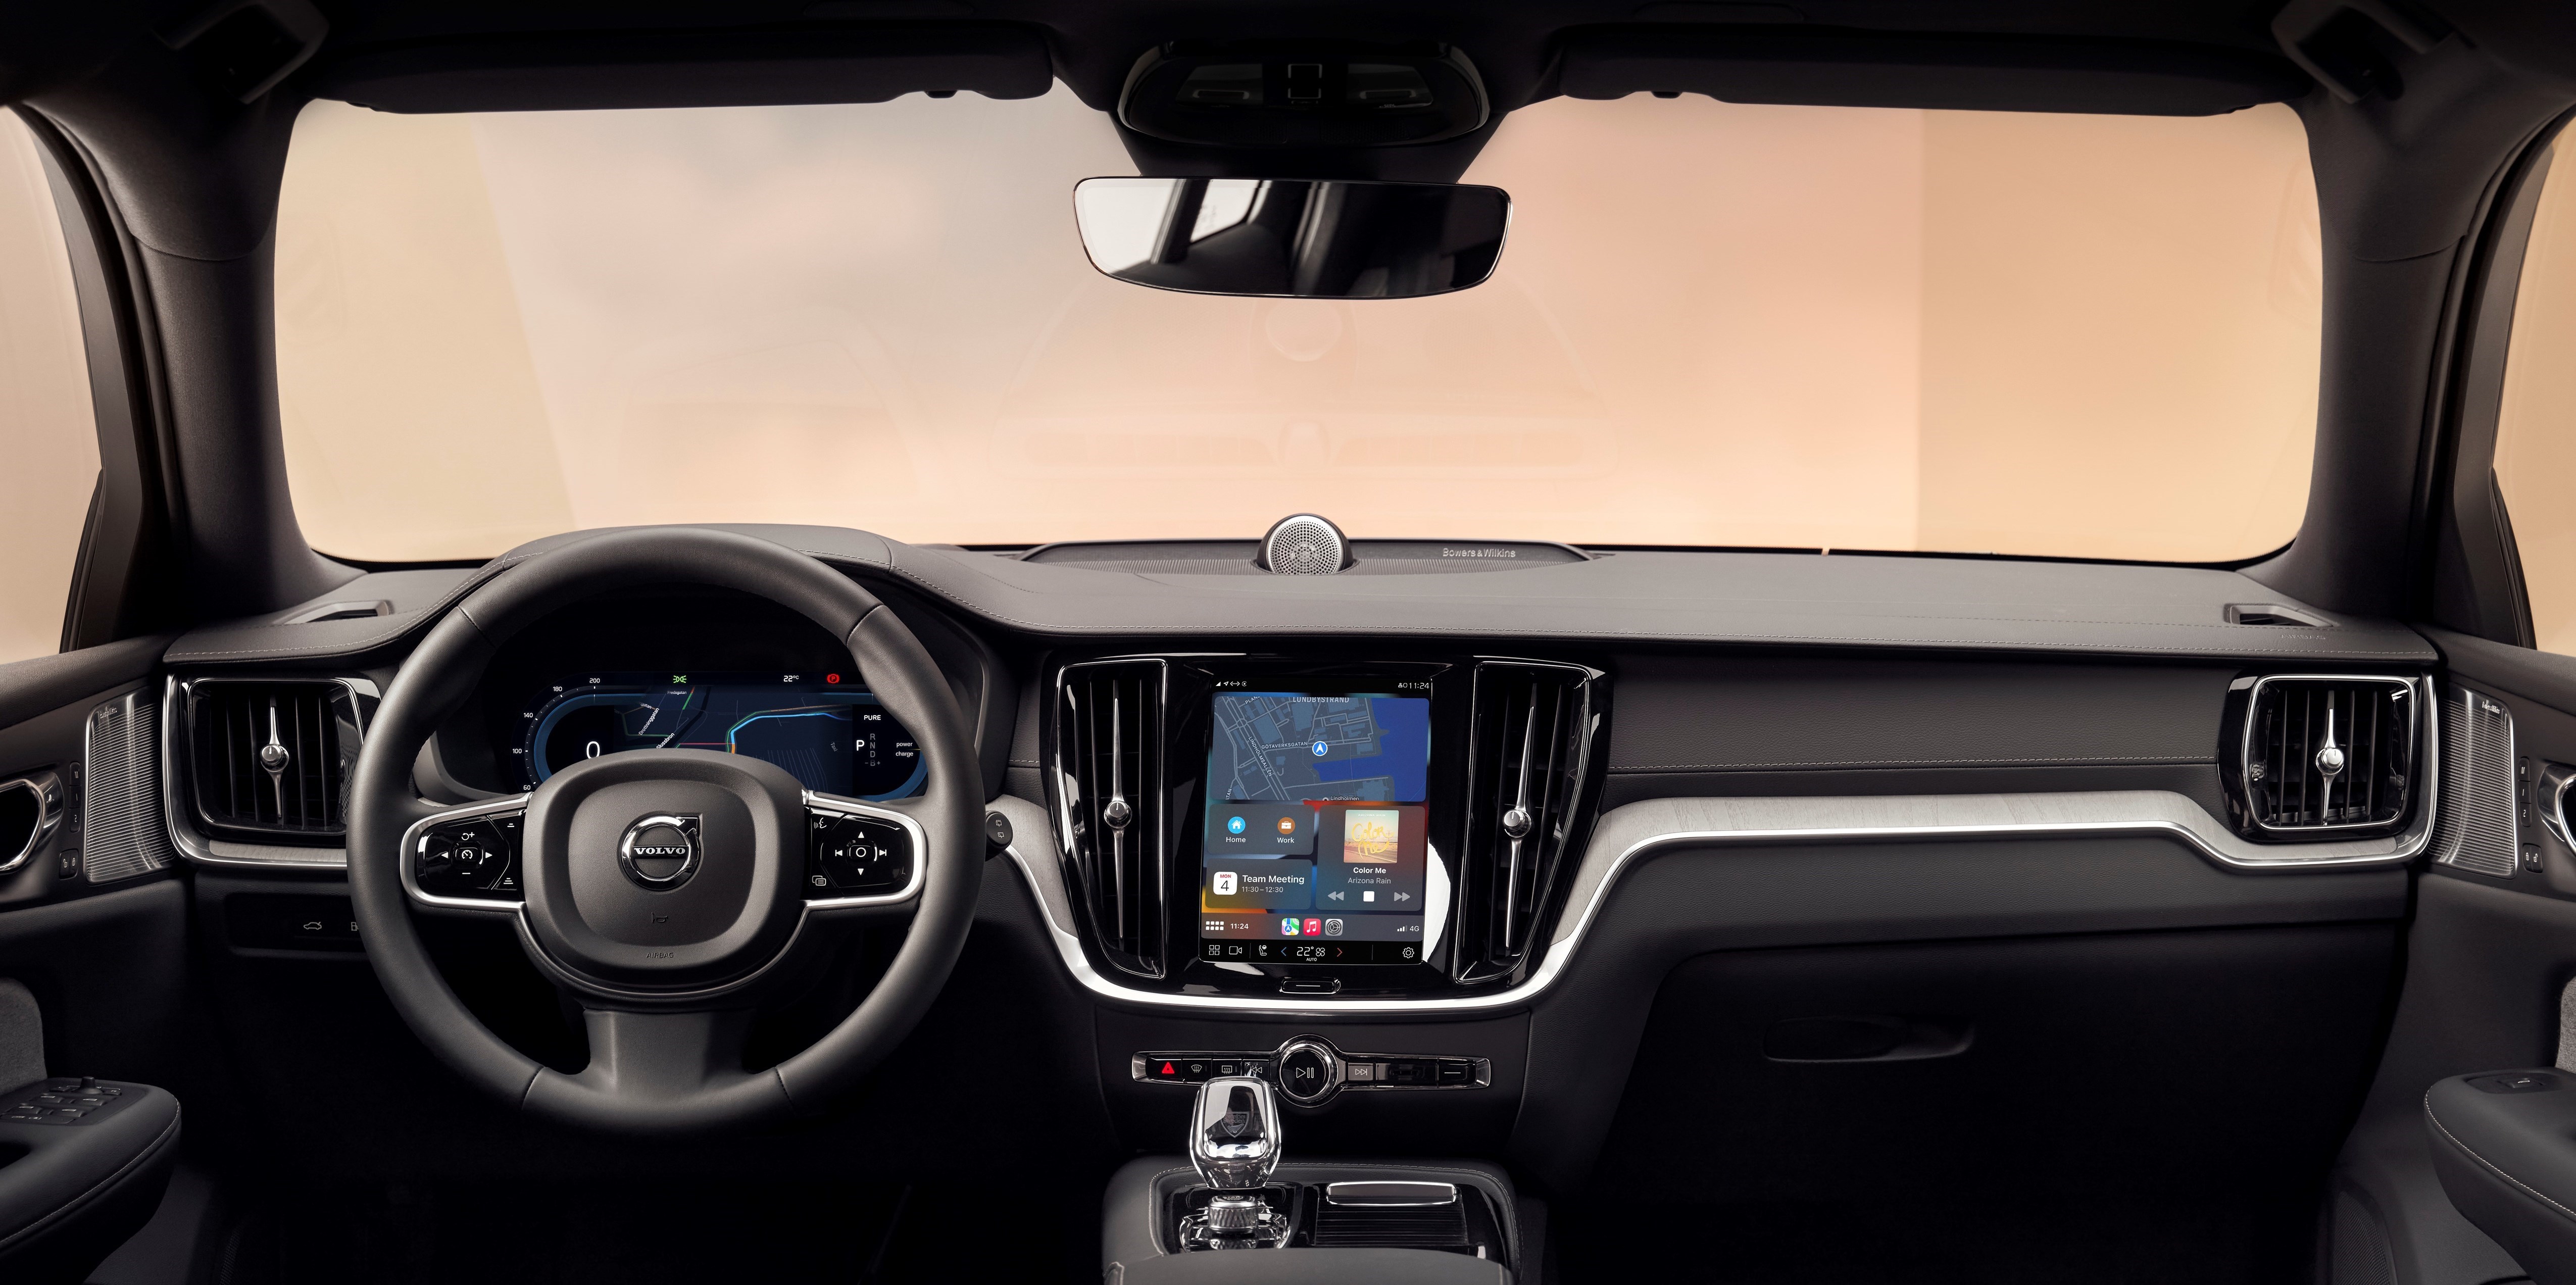 Volvo adds Apple CarPlay with overtheairsoftware Tech Digest